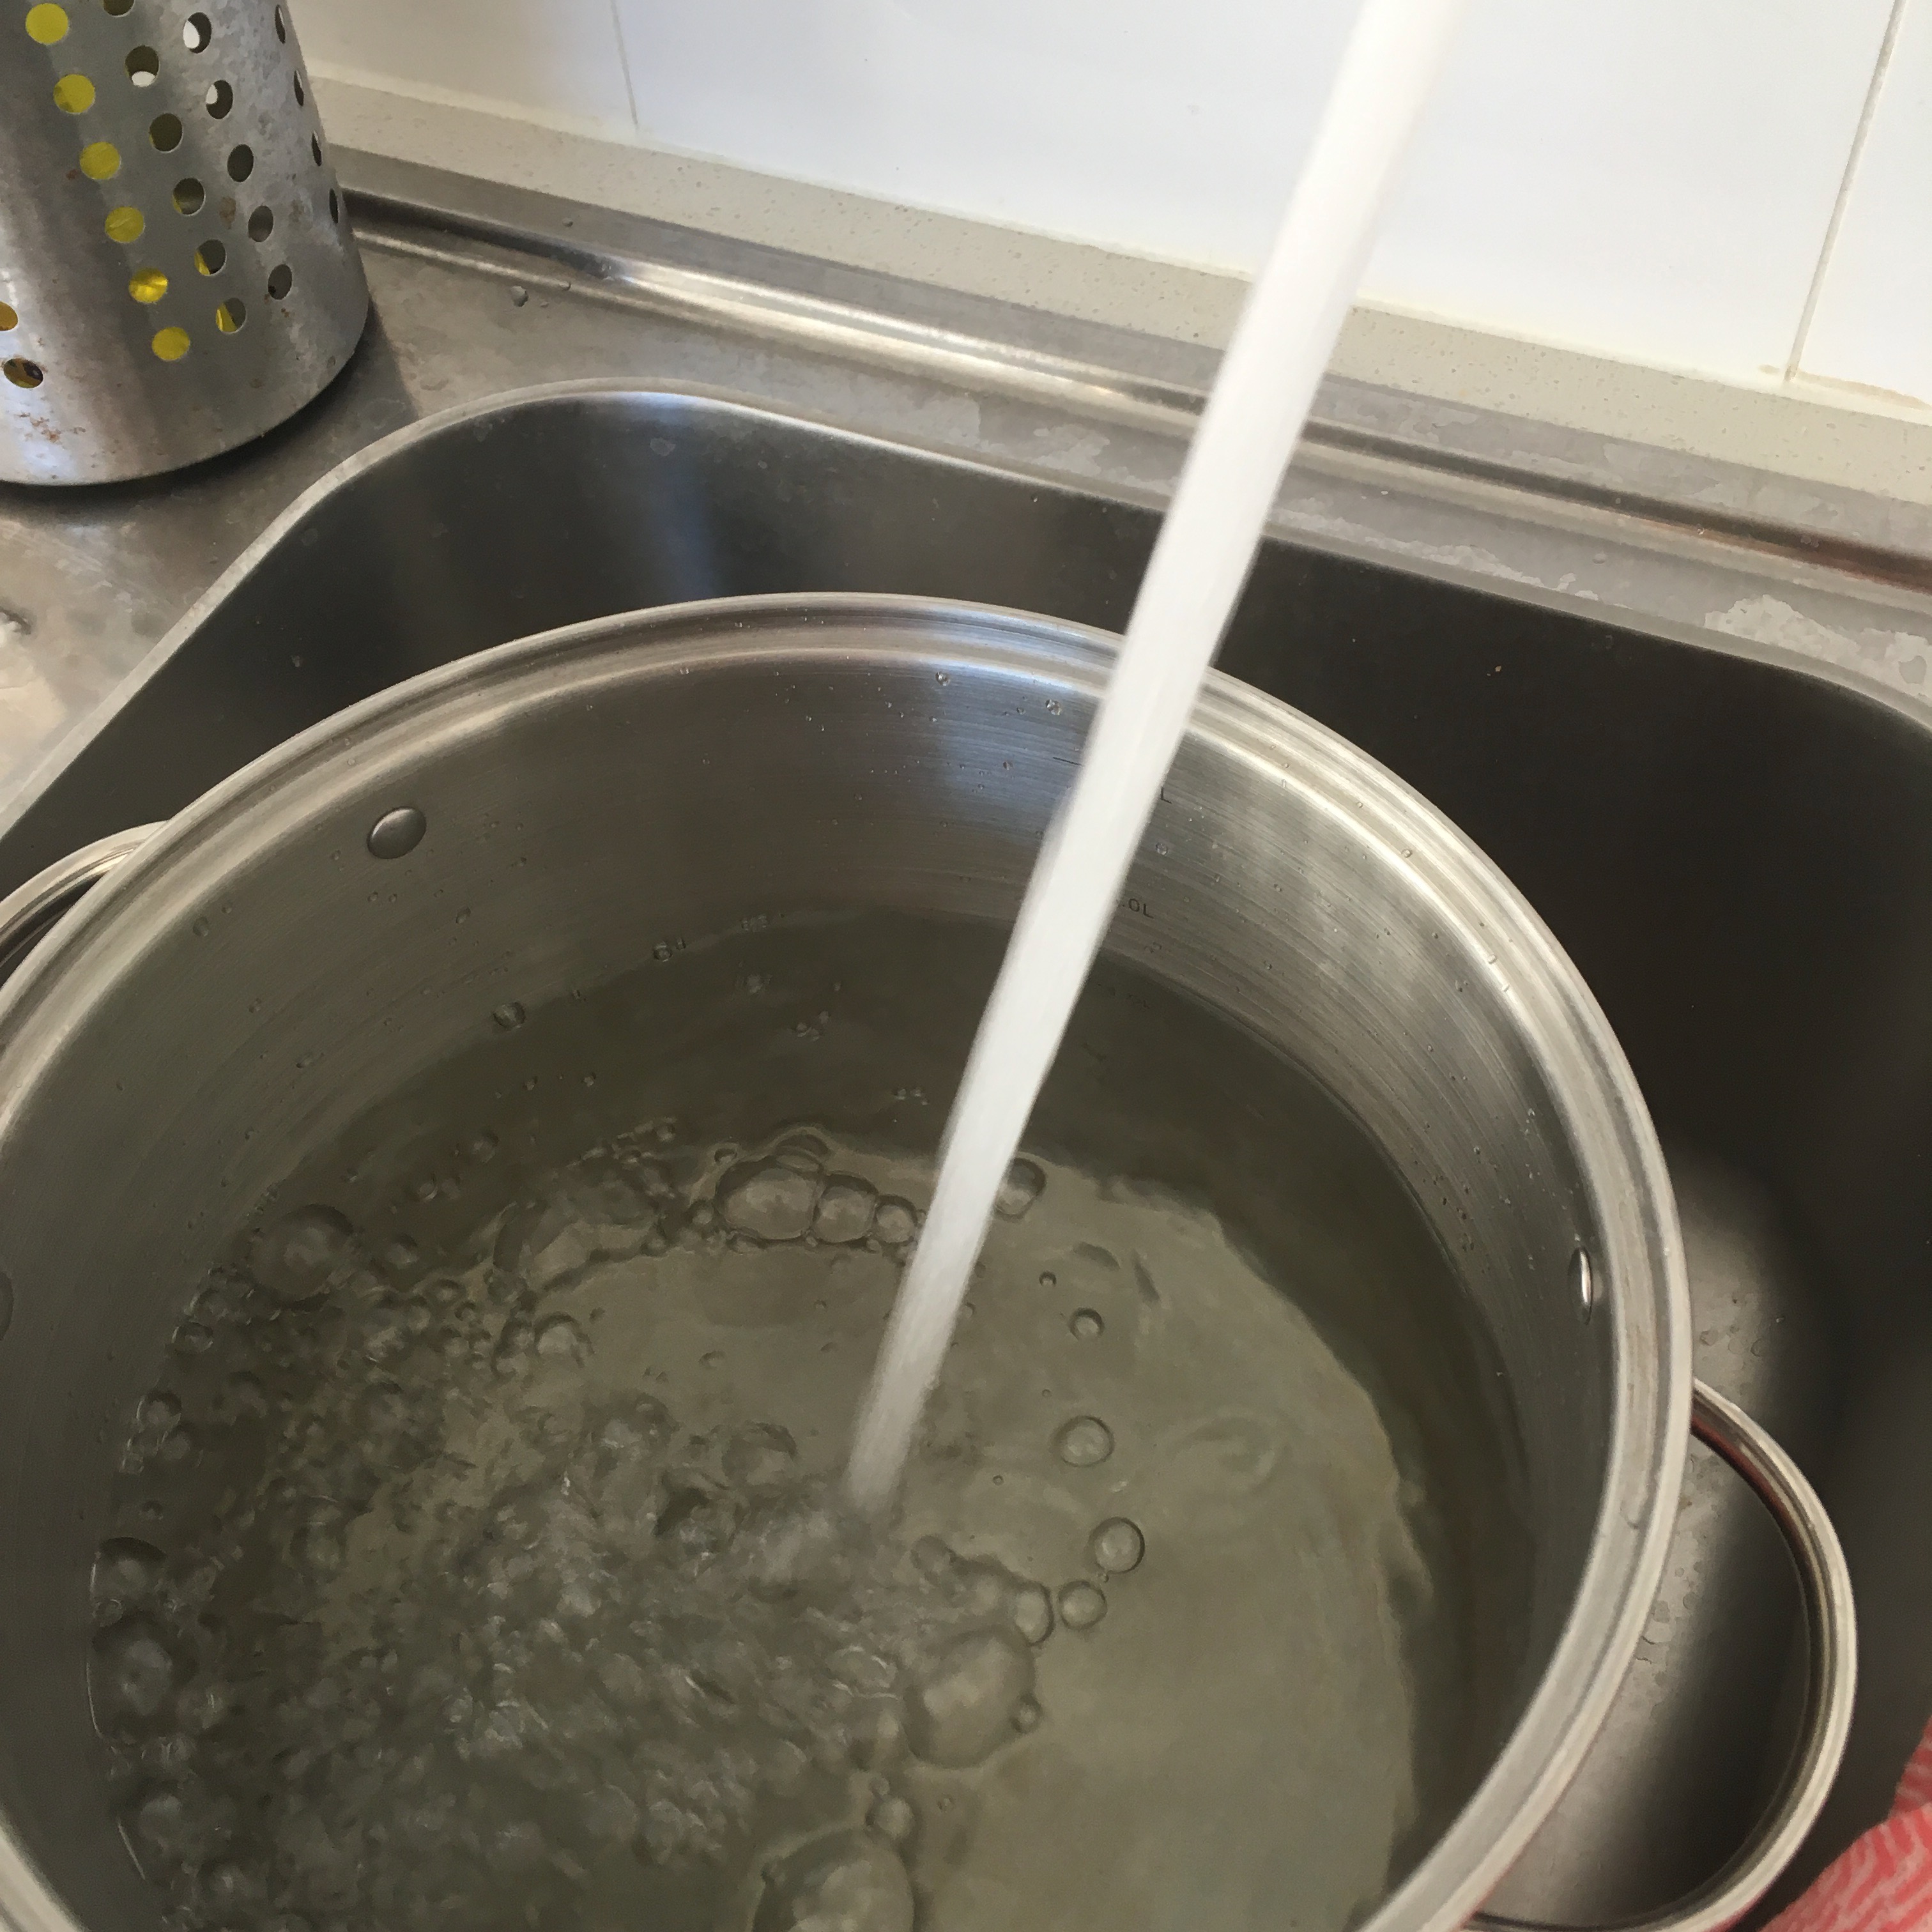 Fill a pot with 6.5 L of tap water